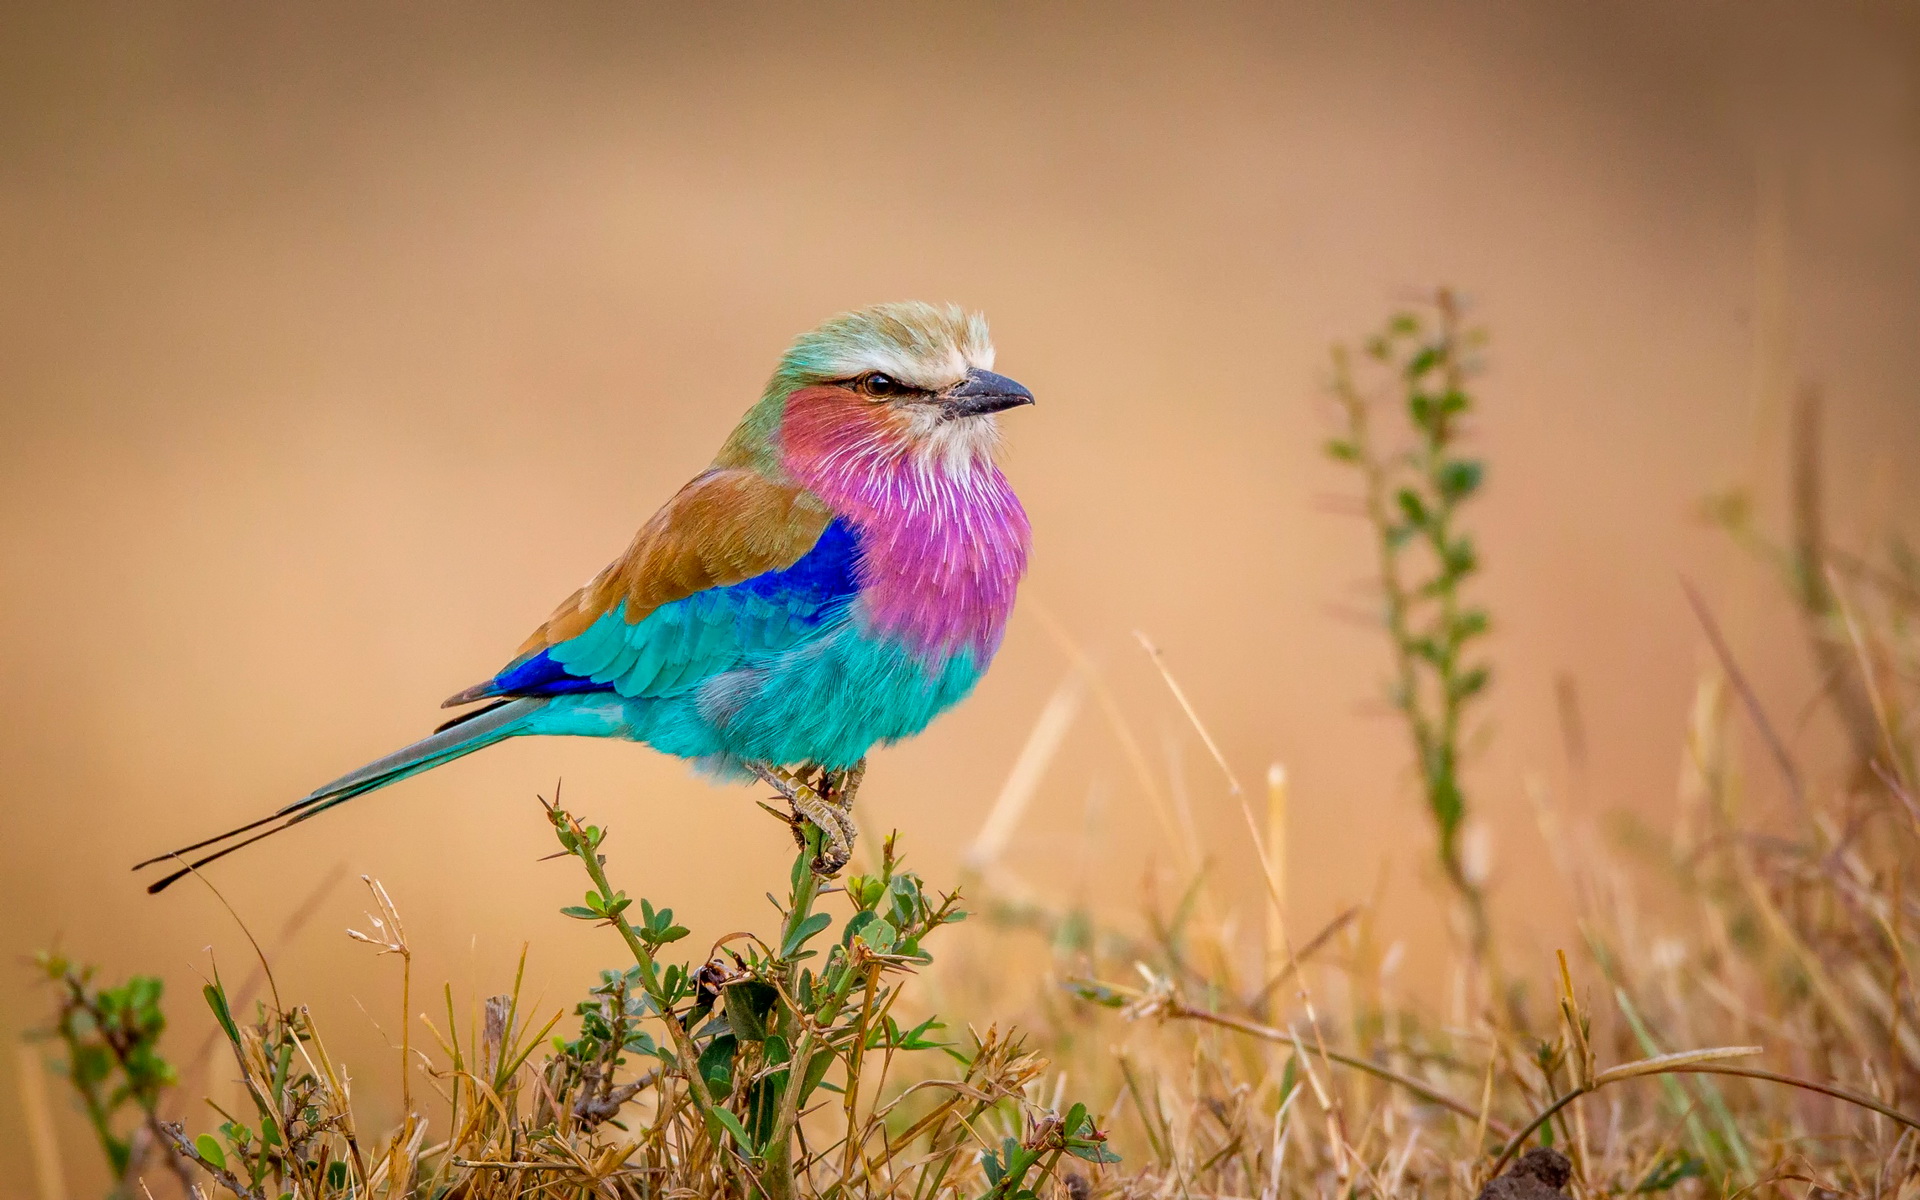 HD desktop wallpaper featuring a vibrant lilac-breasted roller perched in a natural grassy setting.